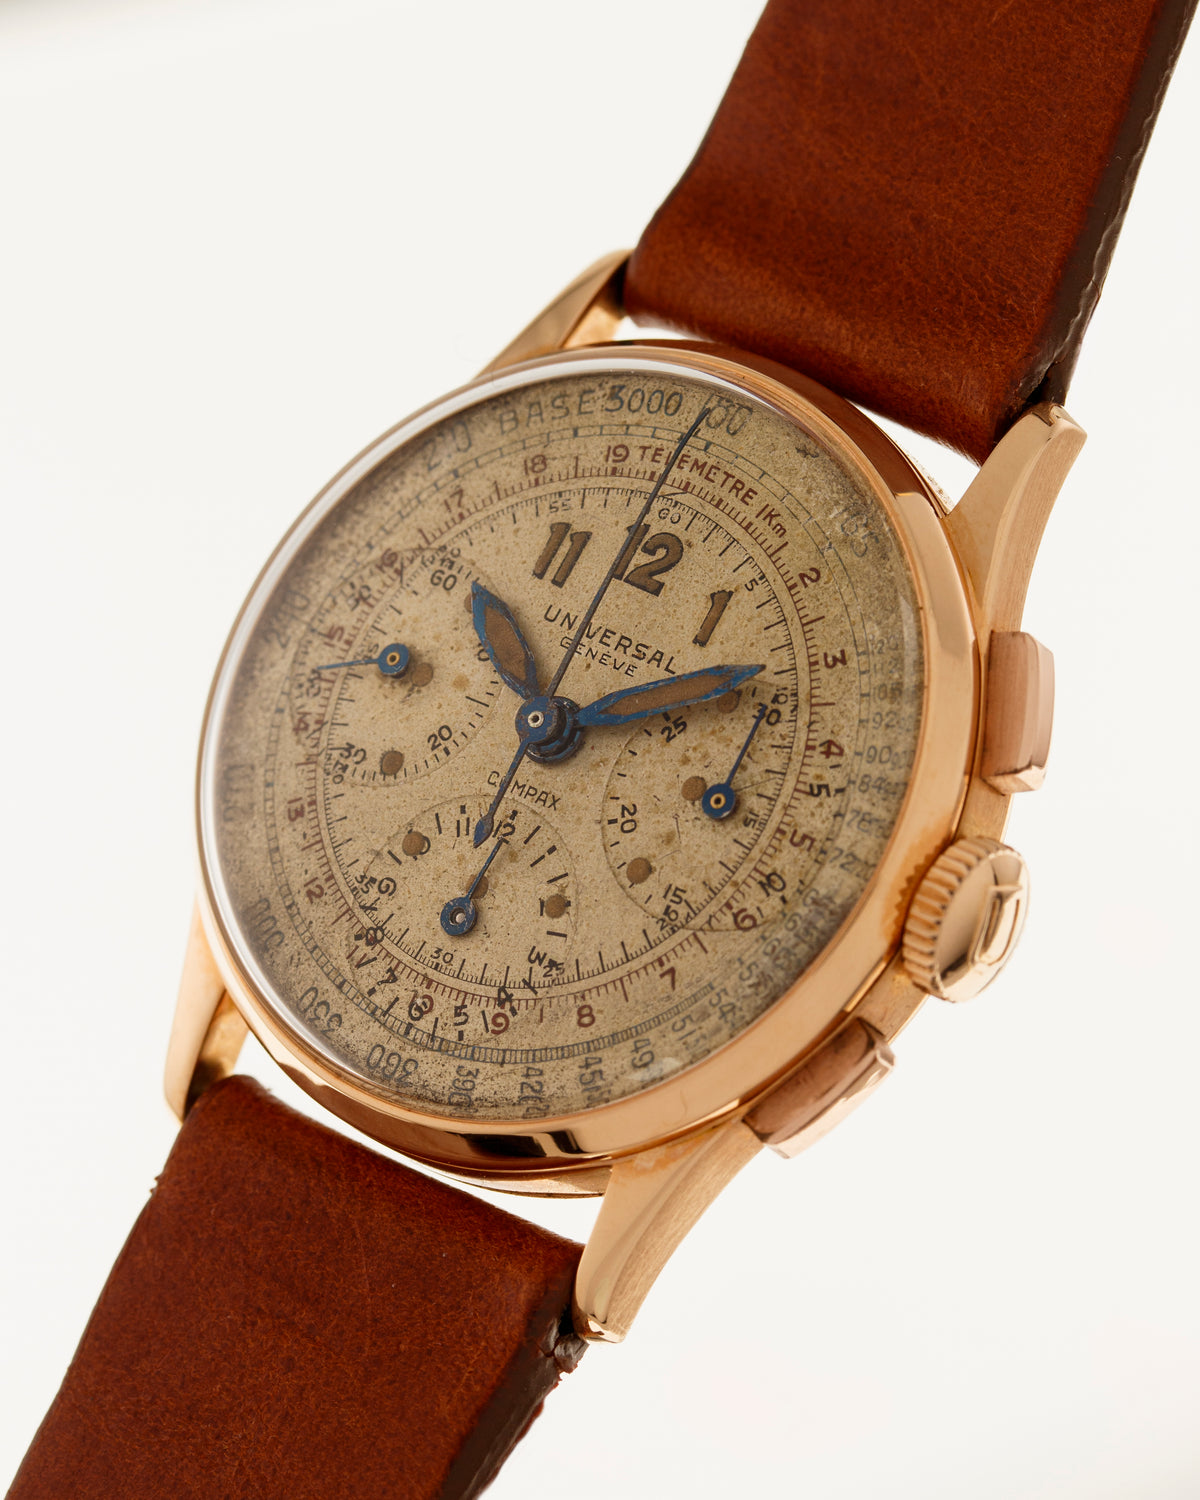 Universal Genève Compax retailed for Brazilian Army in rose gold